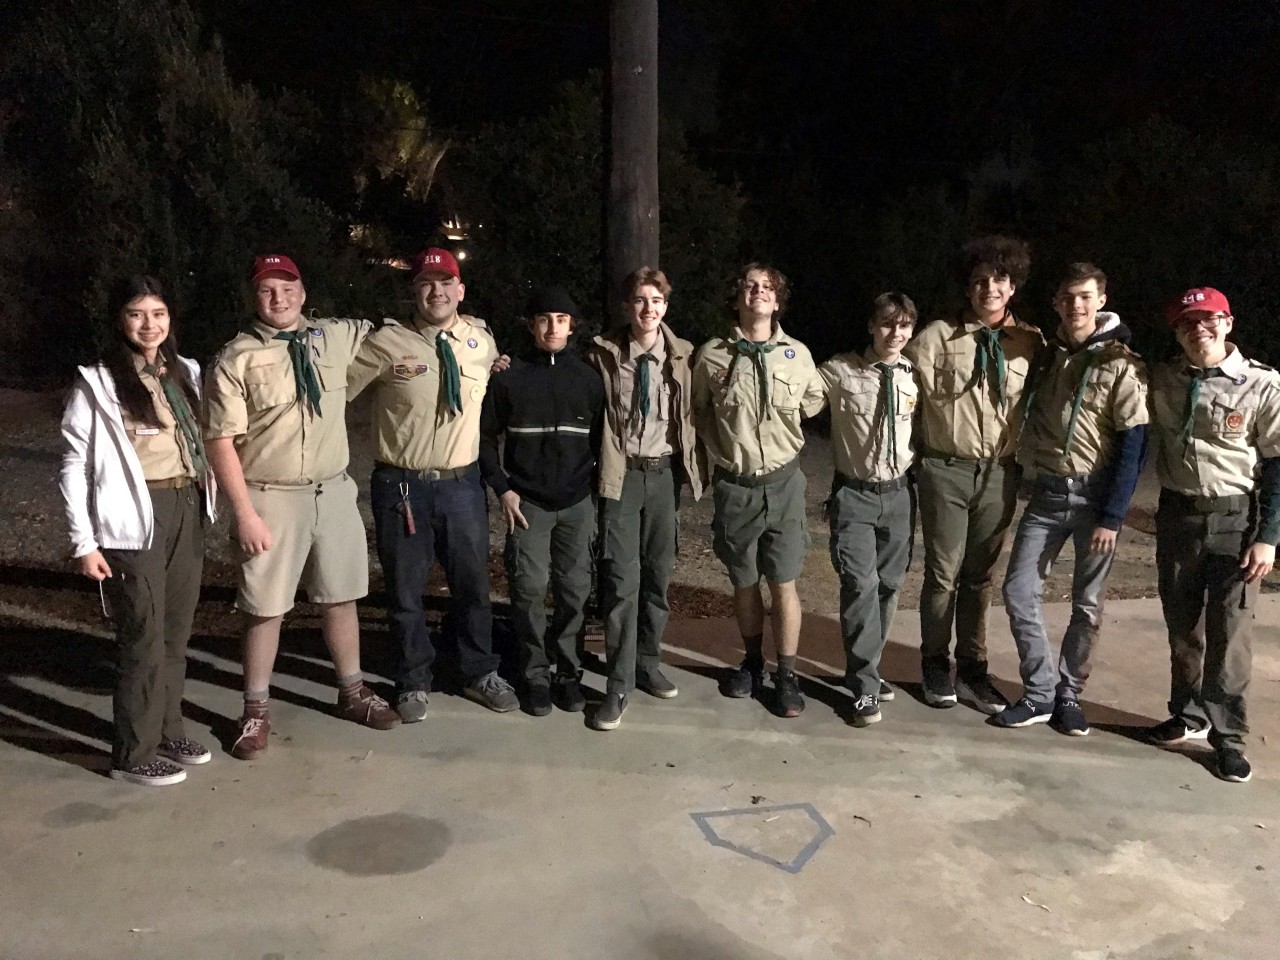 Welcome new leadership of troop 318!. We are excited for a new year filled with lots of adventure!
Also let us welcome the newly reorganized patrols of this year!